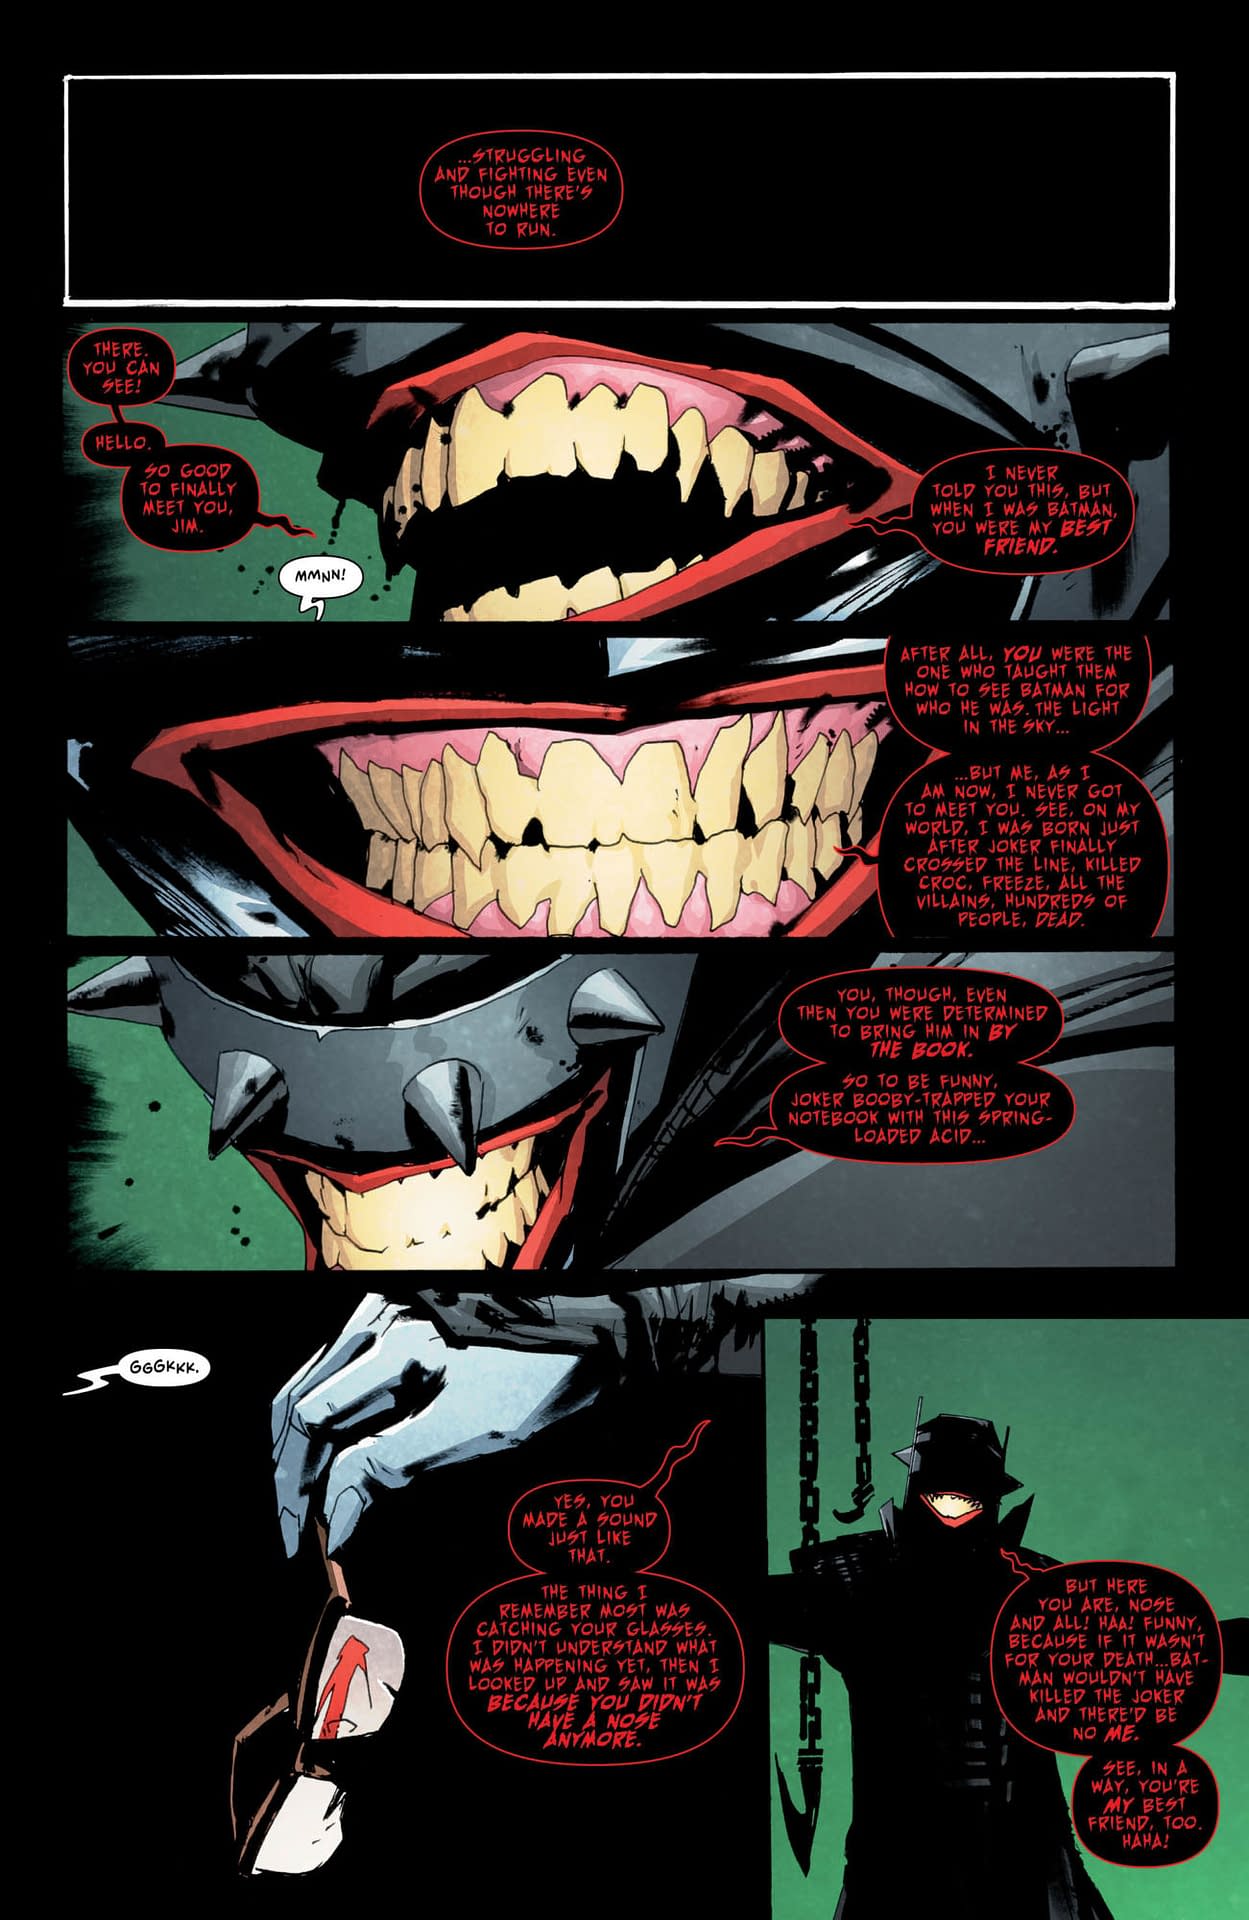 In Batman Who Laughs #4, We Learn Alfred Can Beat Batman in a Fight